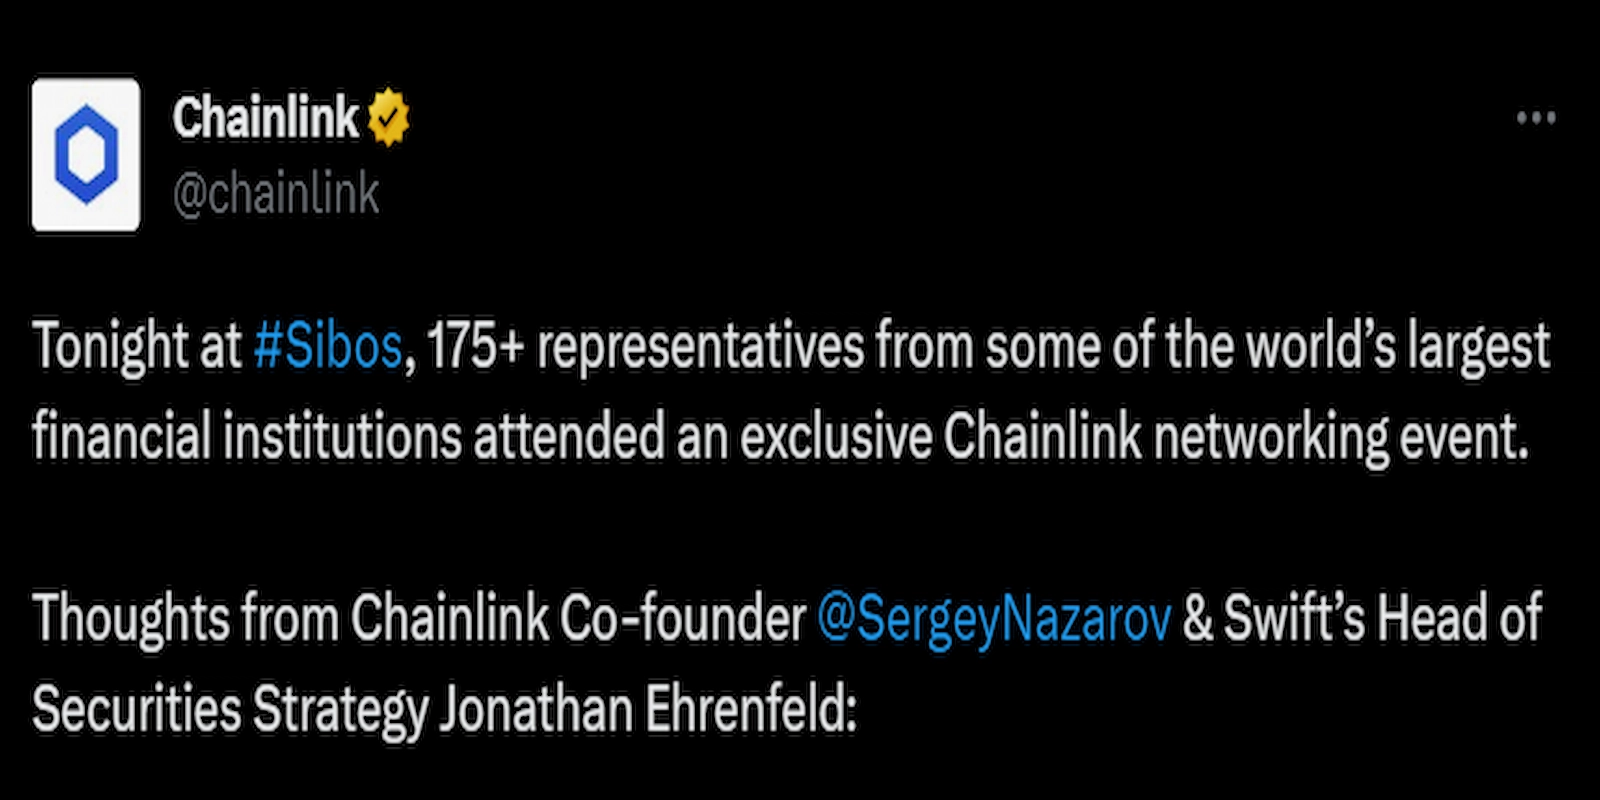 SWIFT's head of securities strategy Jonathan Ehrenfeld was impressed with Chainlink's growth.